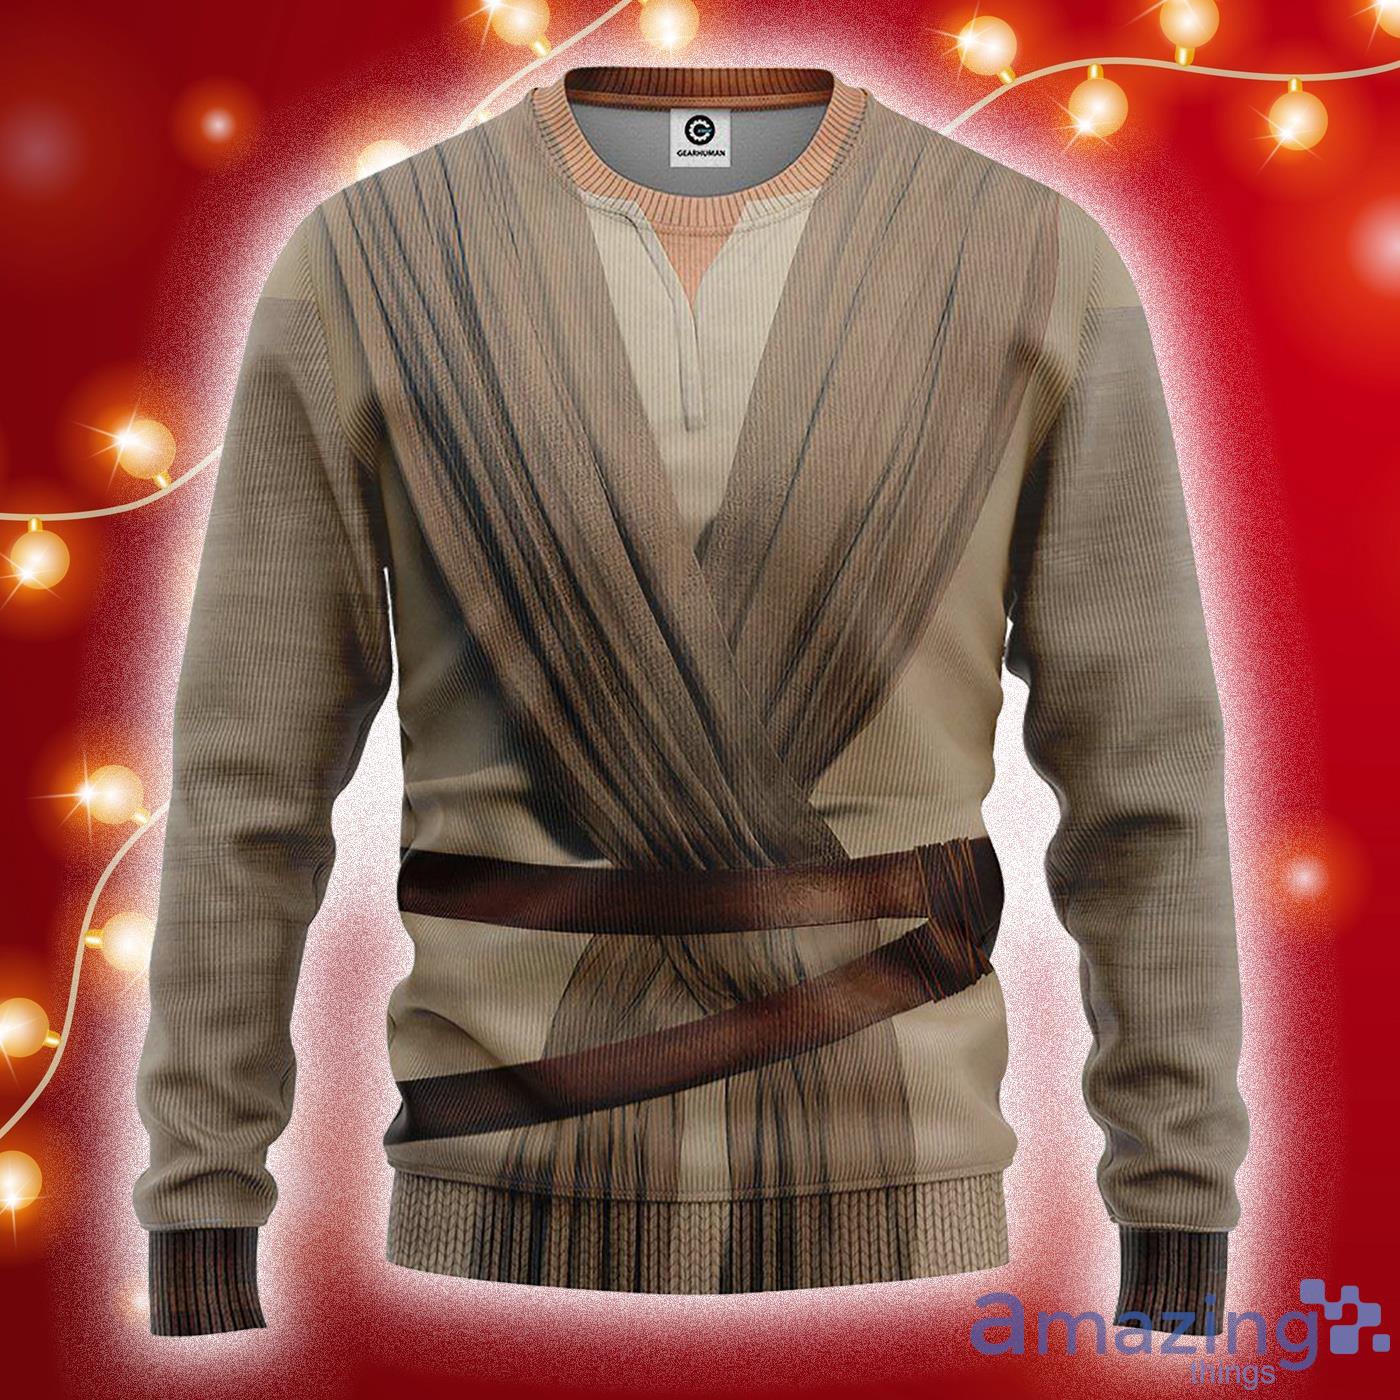 Star Wars Rey Cosplay All Over Print 3D Shirt Product Photo 1